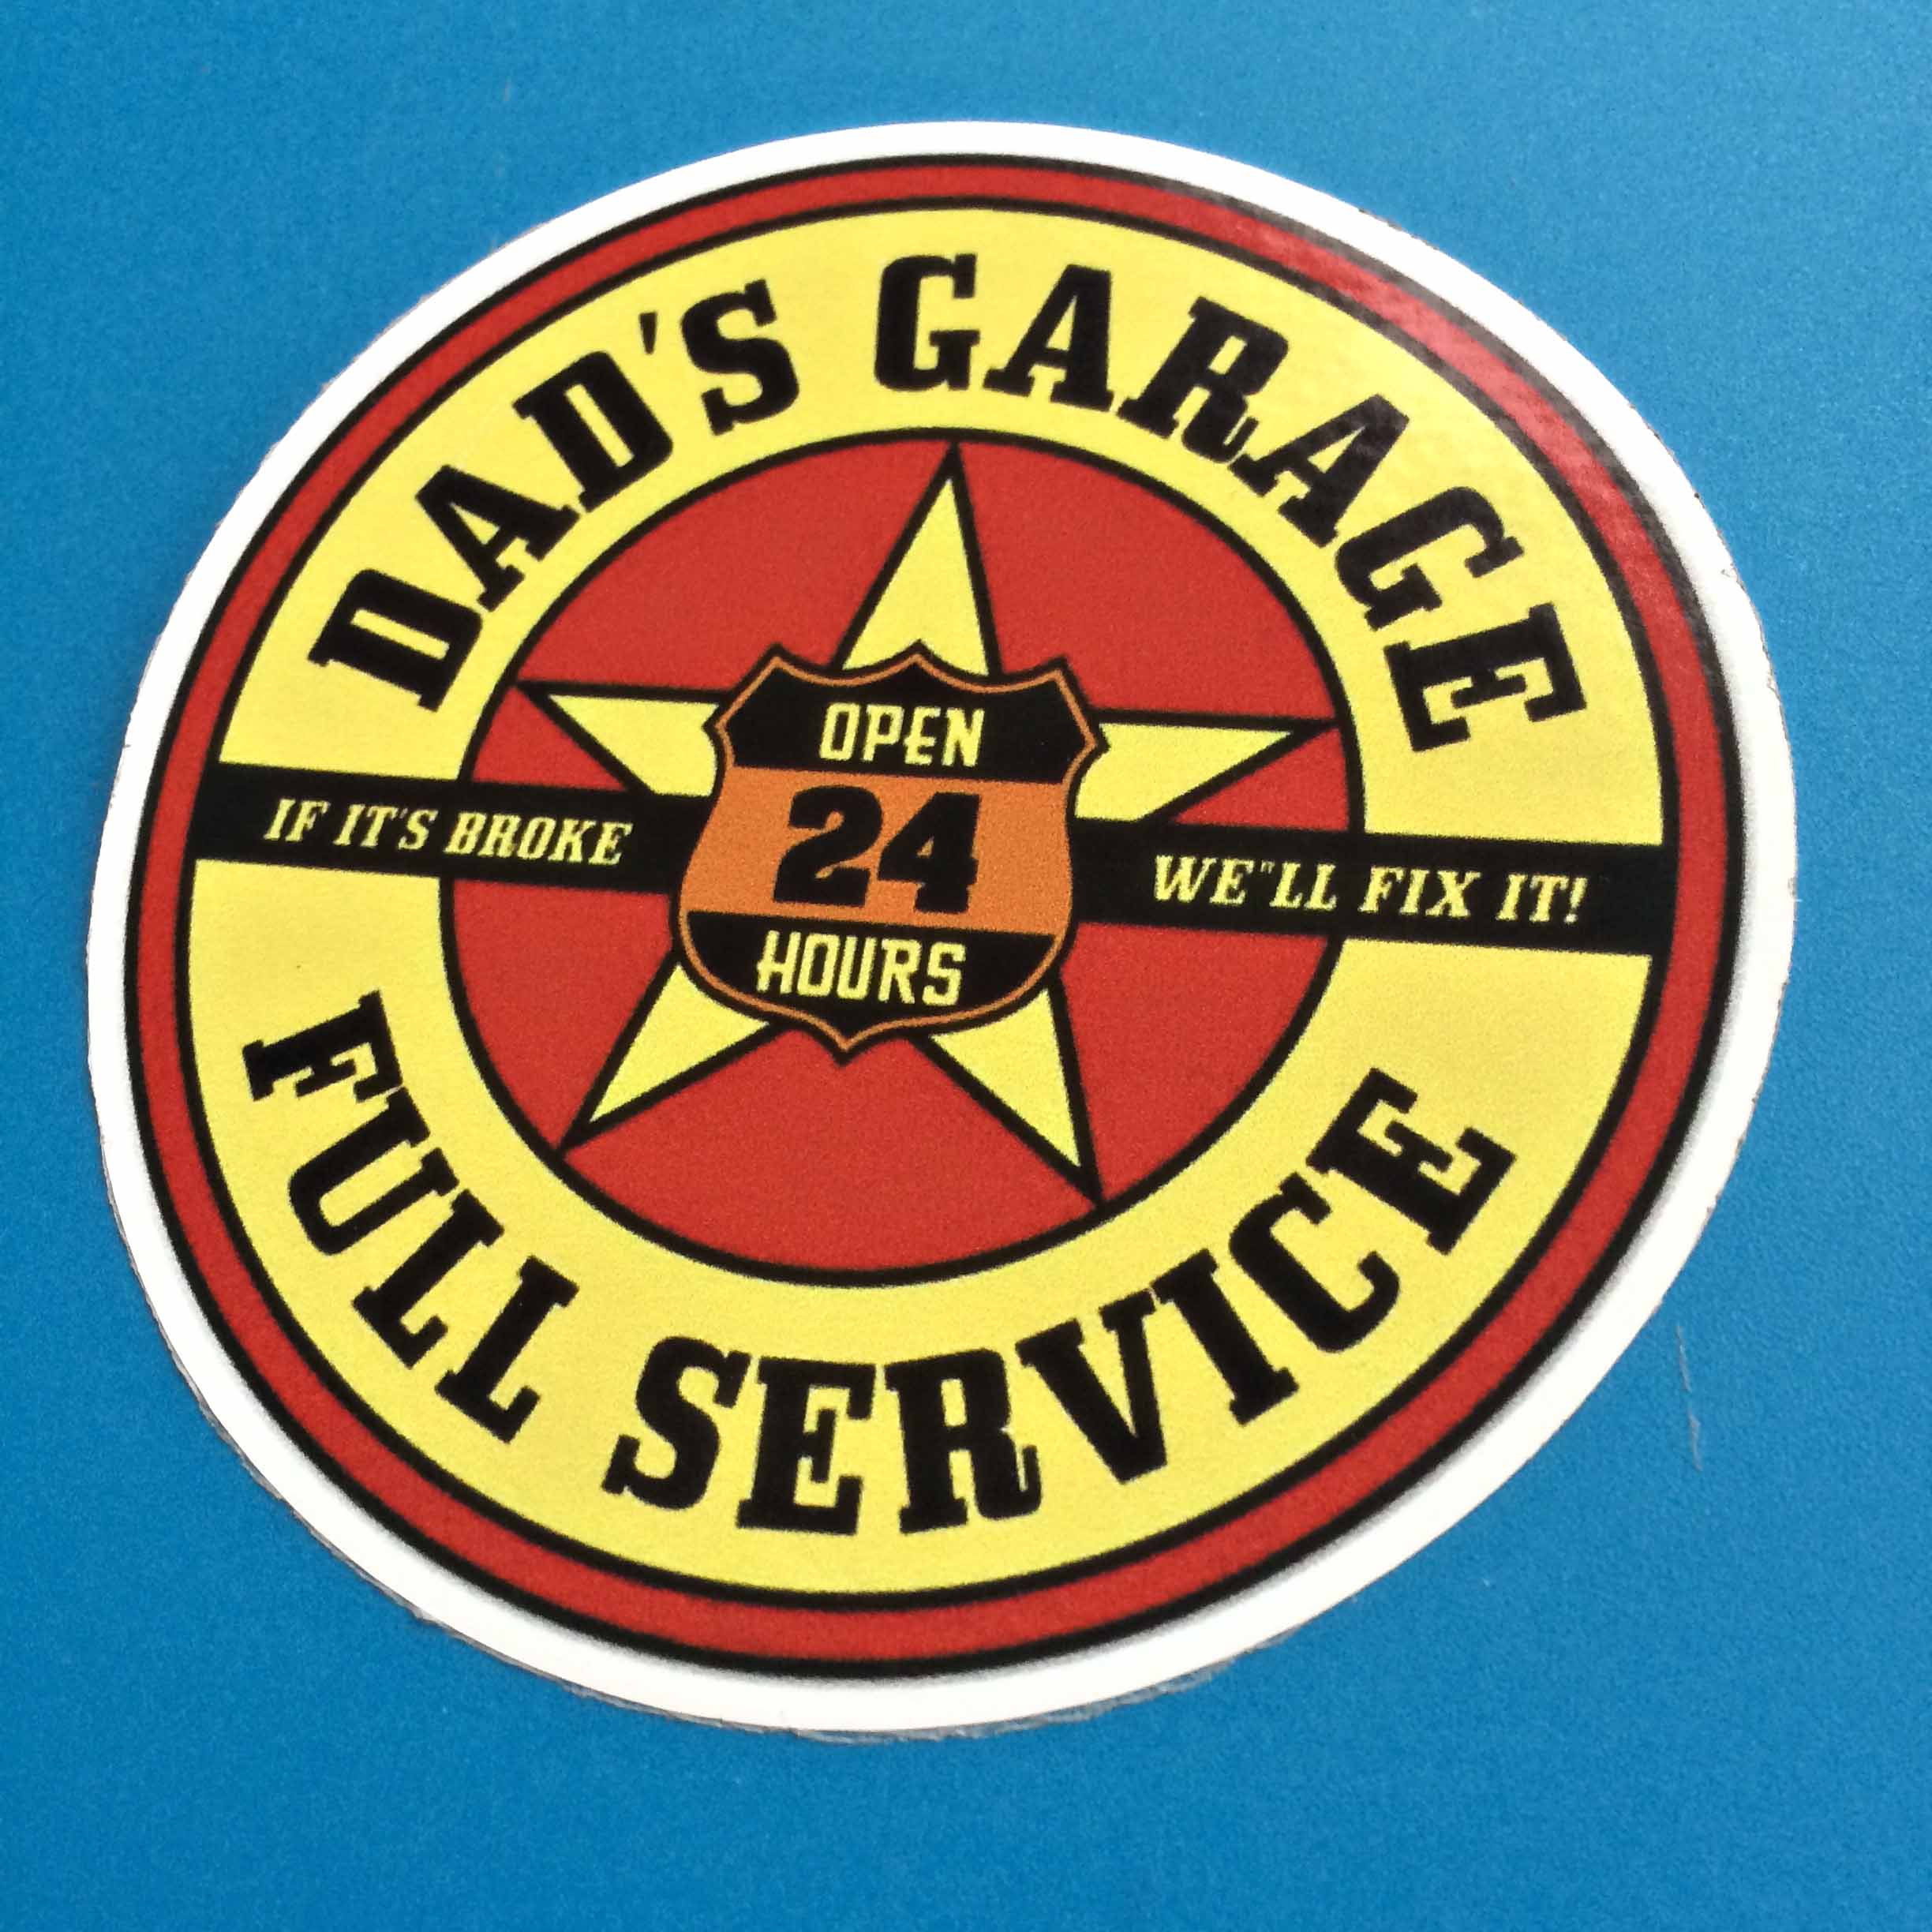 DAD'S GARAGE FULL SERVICE STICKER. Two concentric circles in yellow and red. Dad's Garage Full Service in black lettering surrounds the yellow circle. In the red circle is a yellow star overlaid with a black and orange shield, Open 24 Hours. Across the sticker is a black banner, If It's Broke We'll Fix It!